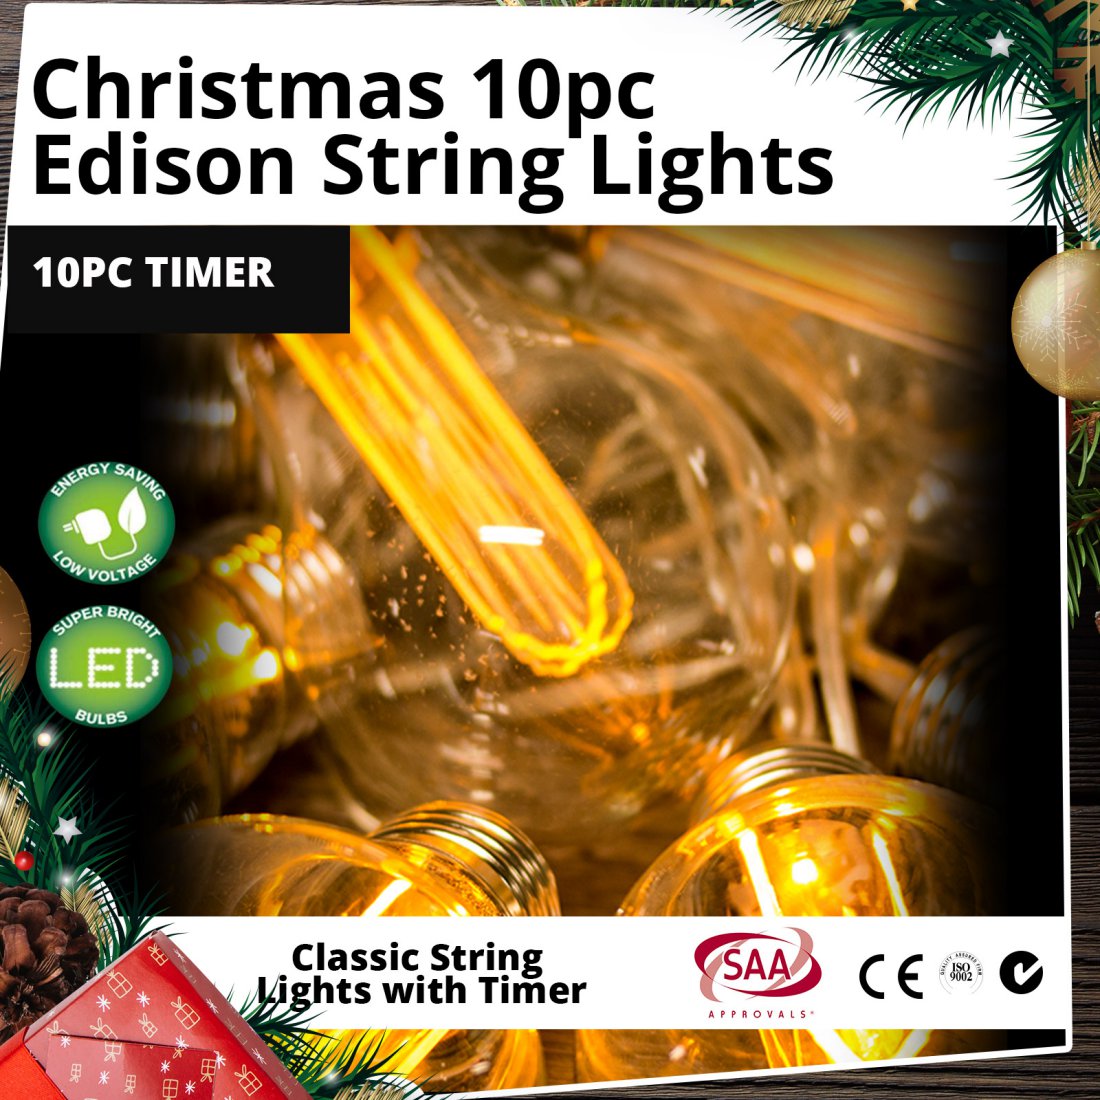 Outdoor LED Edison String Lights 10pc with Timer Christmas Display (CLEARANCE)